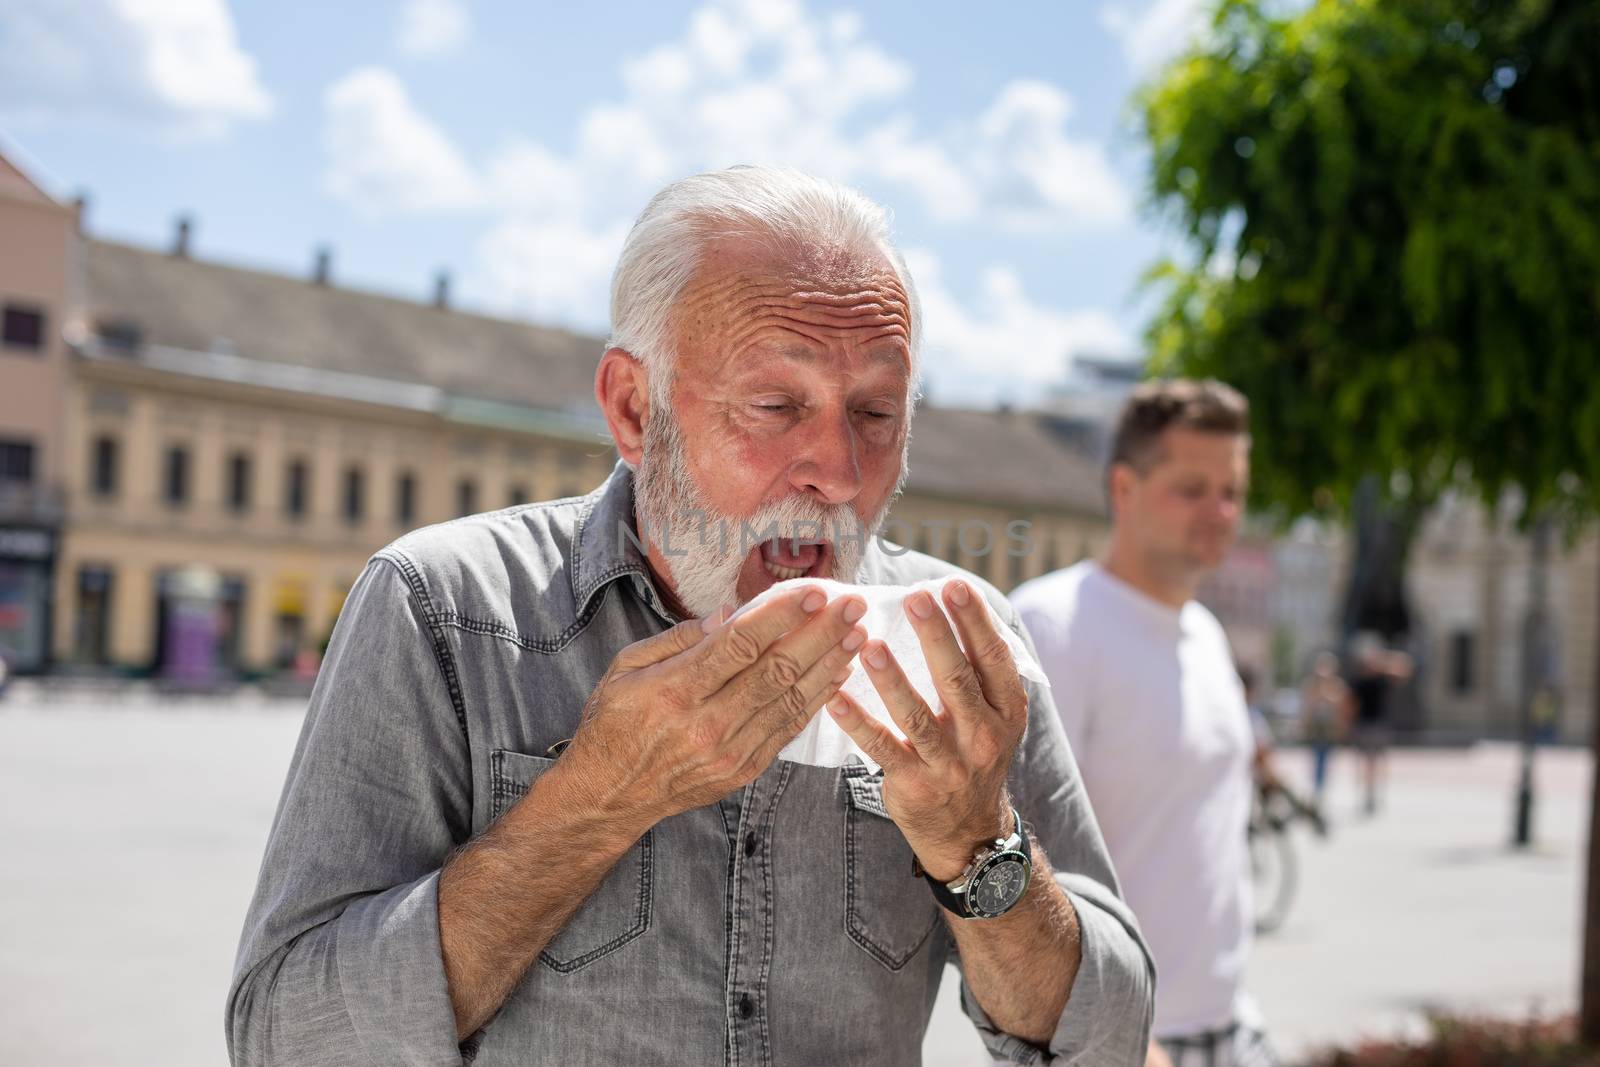 Old man man coughs and sneezes into a handkerchief on street, al by adamr